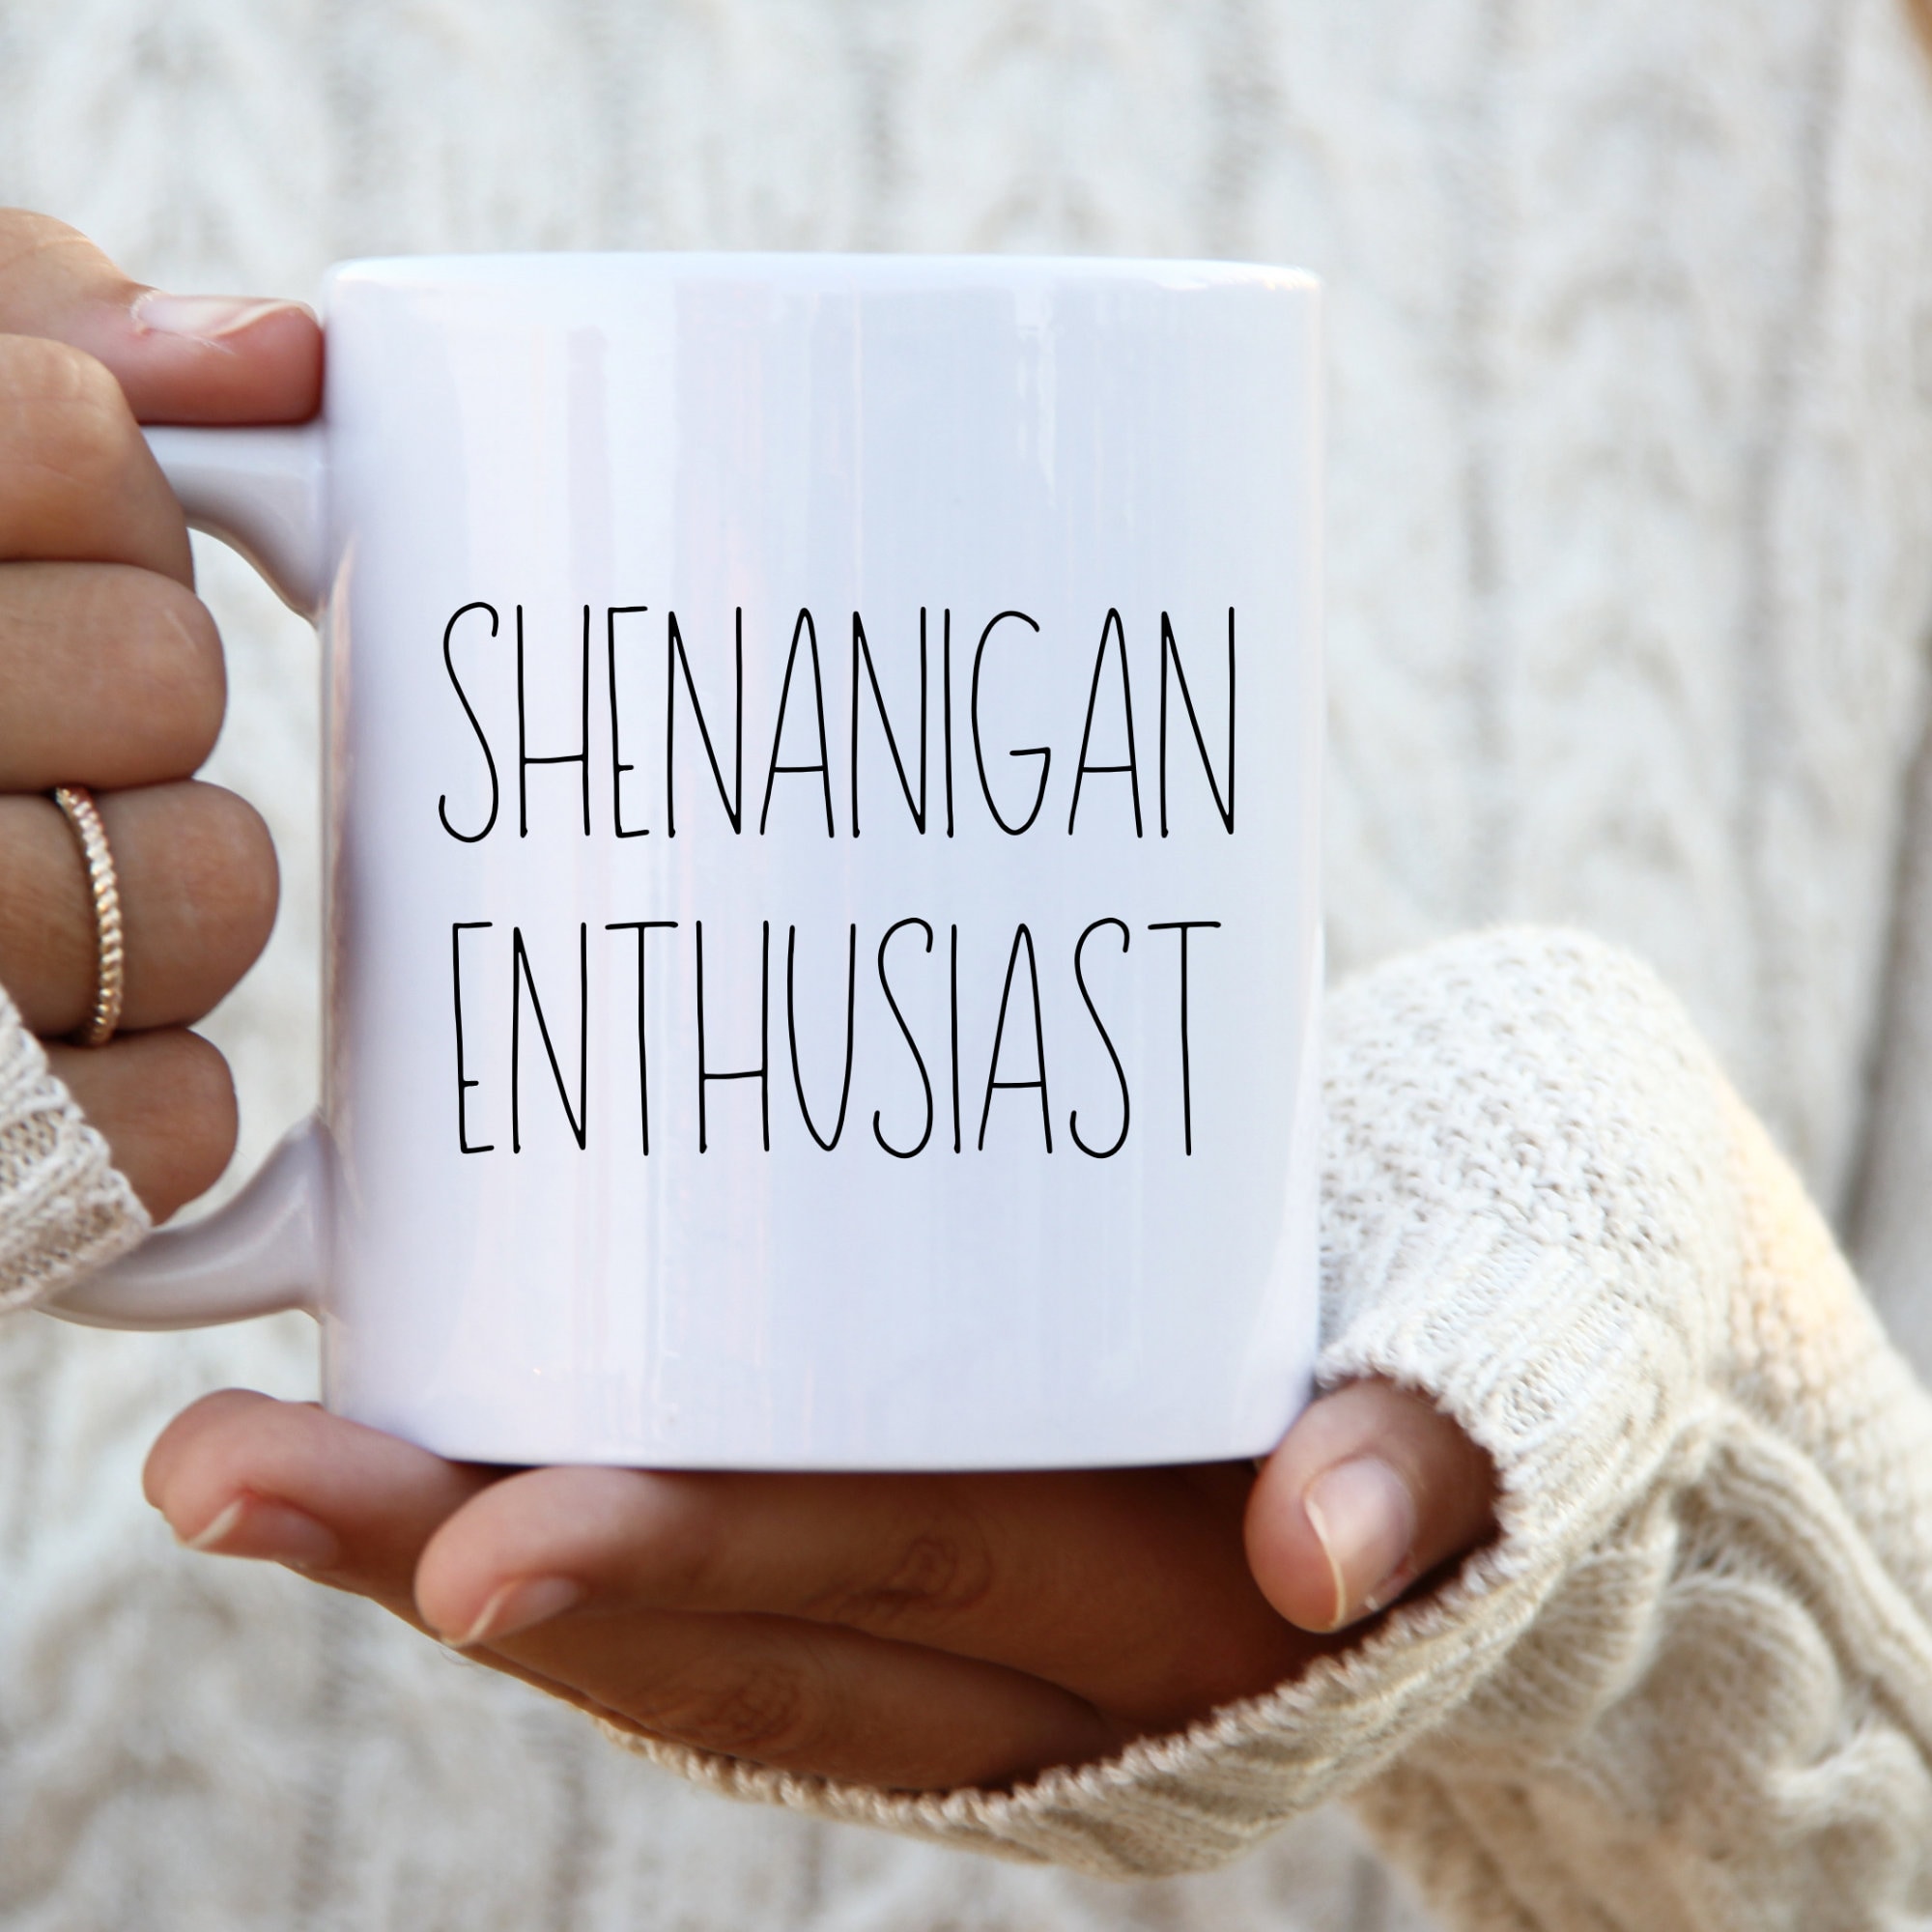 Shenanigan Enthusiast Sticker  Adult Stickers - Twisted Wares®